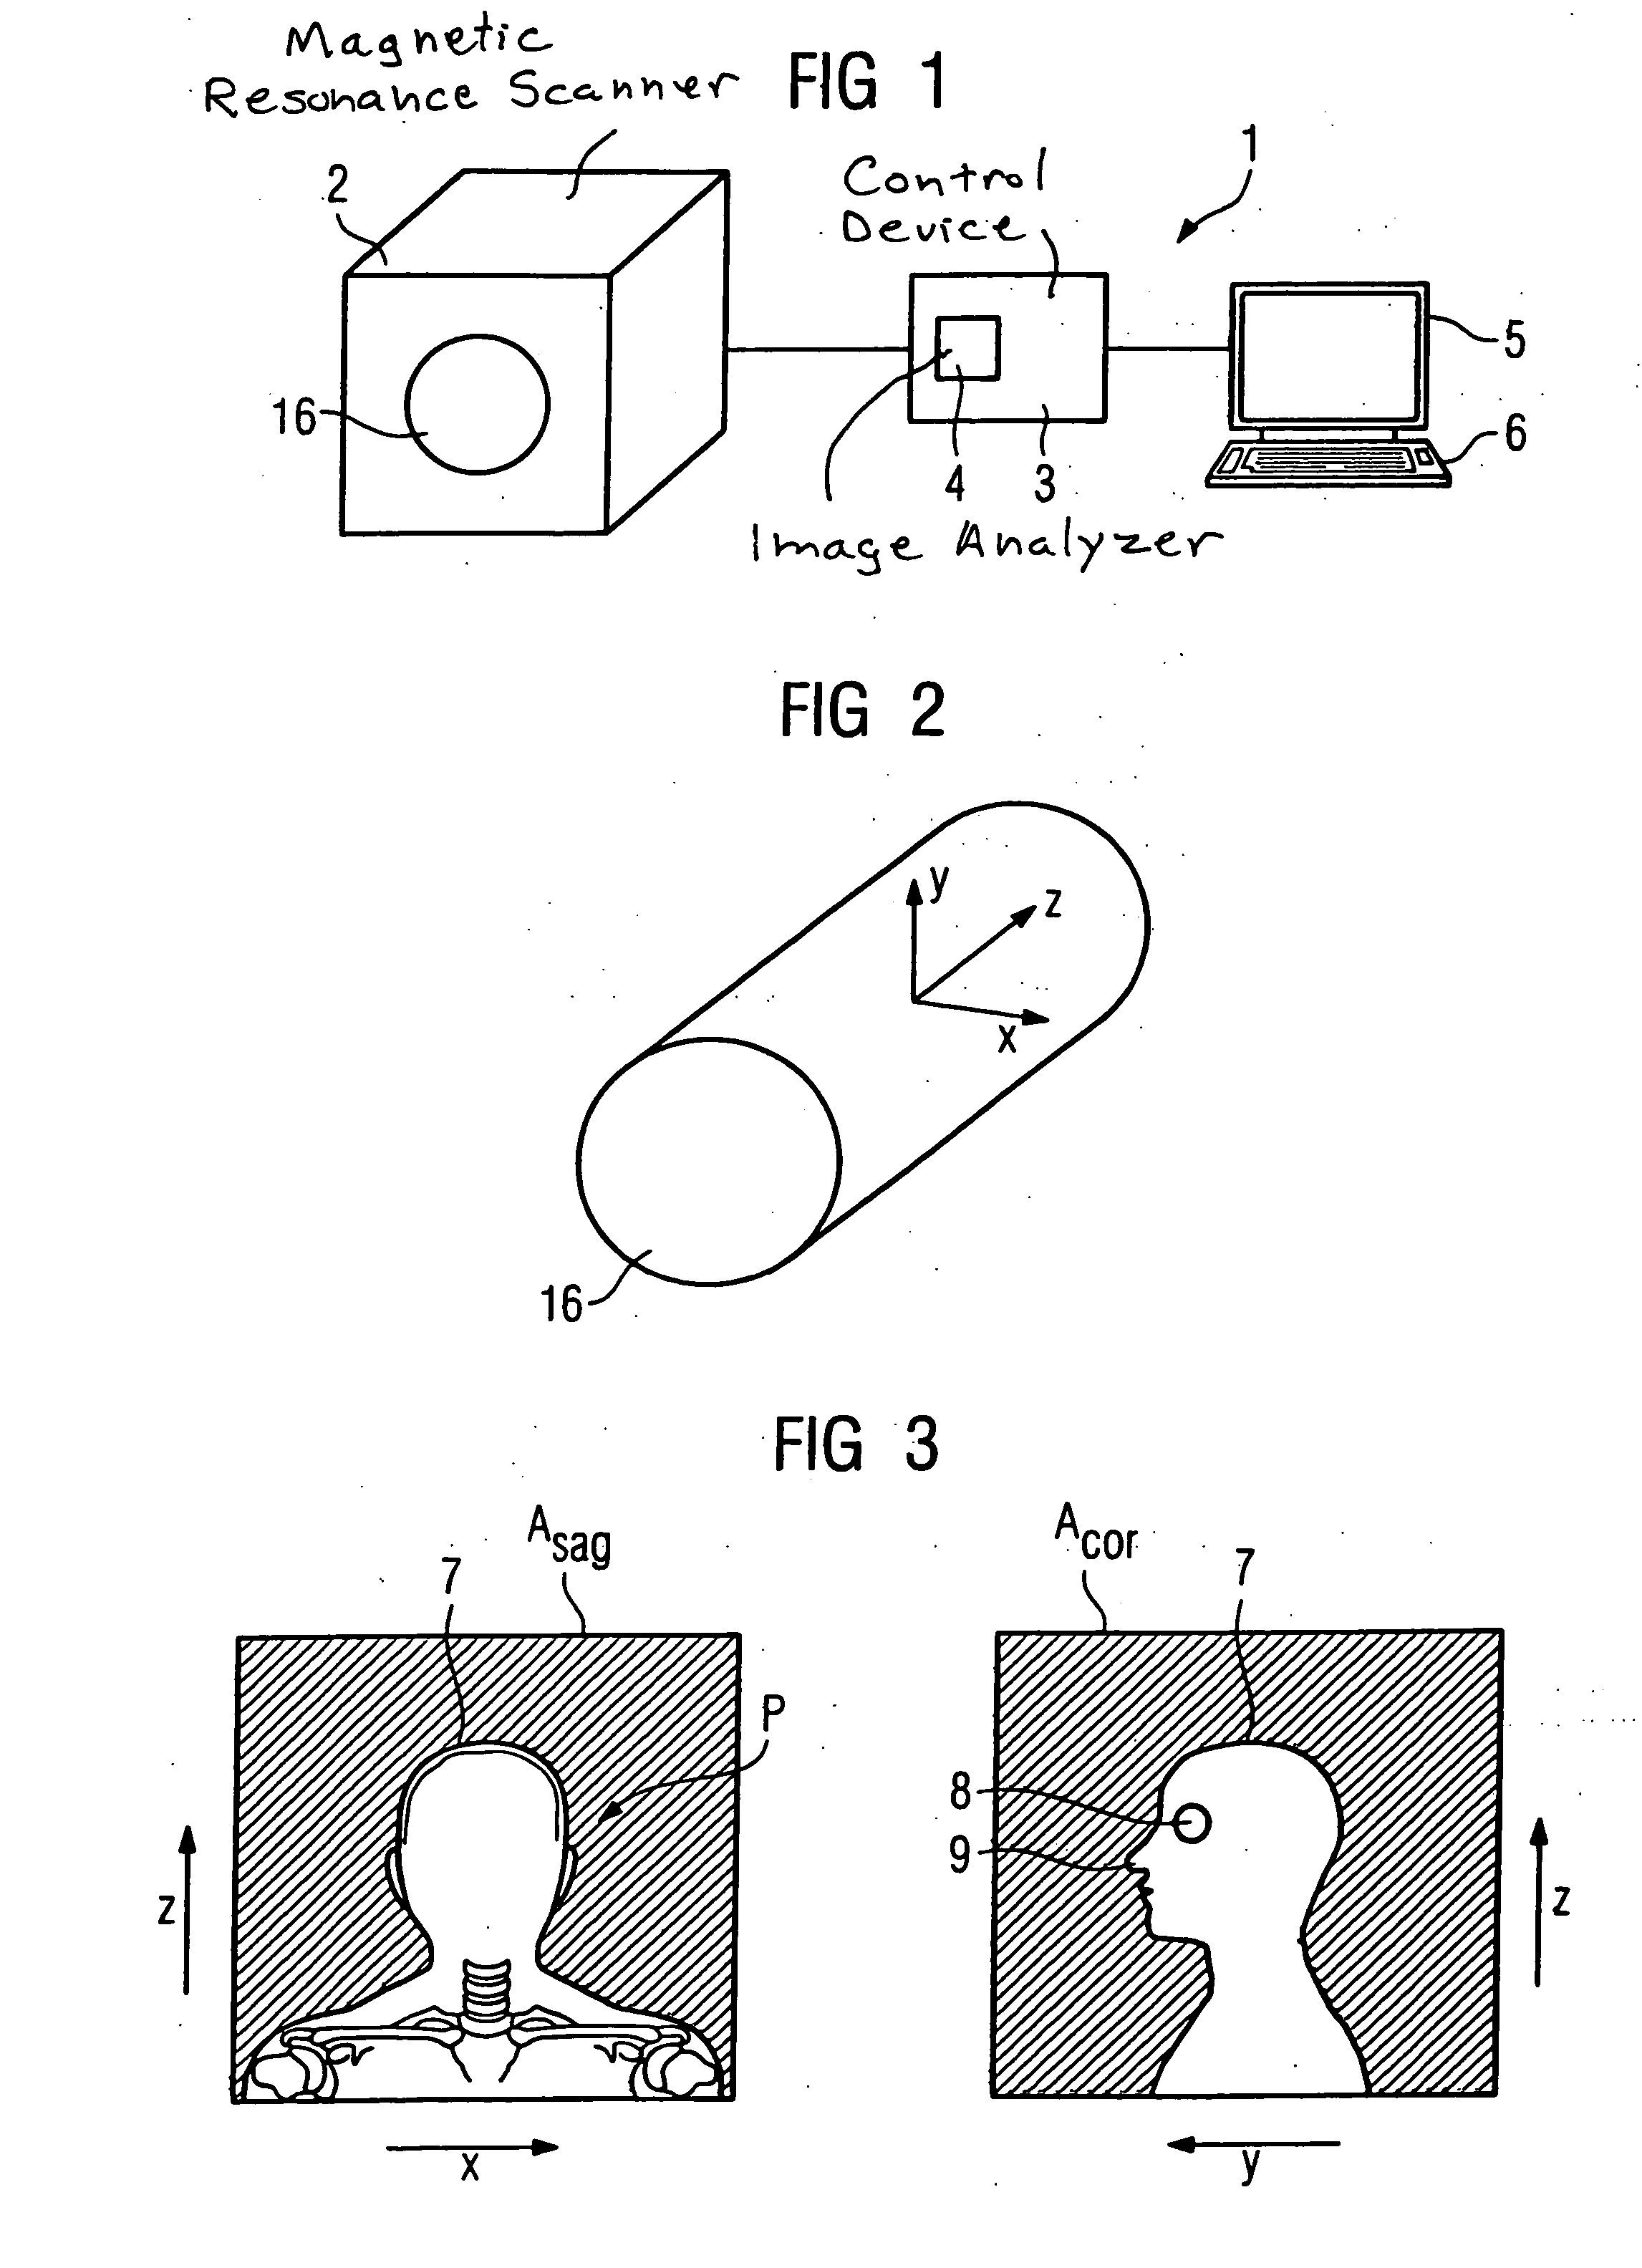 Method for determination of the supported position of a patient in a magnetic resonance apparatus